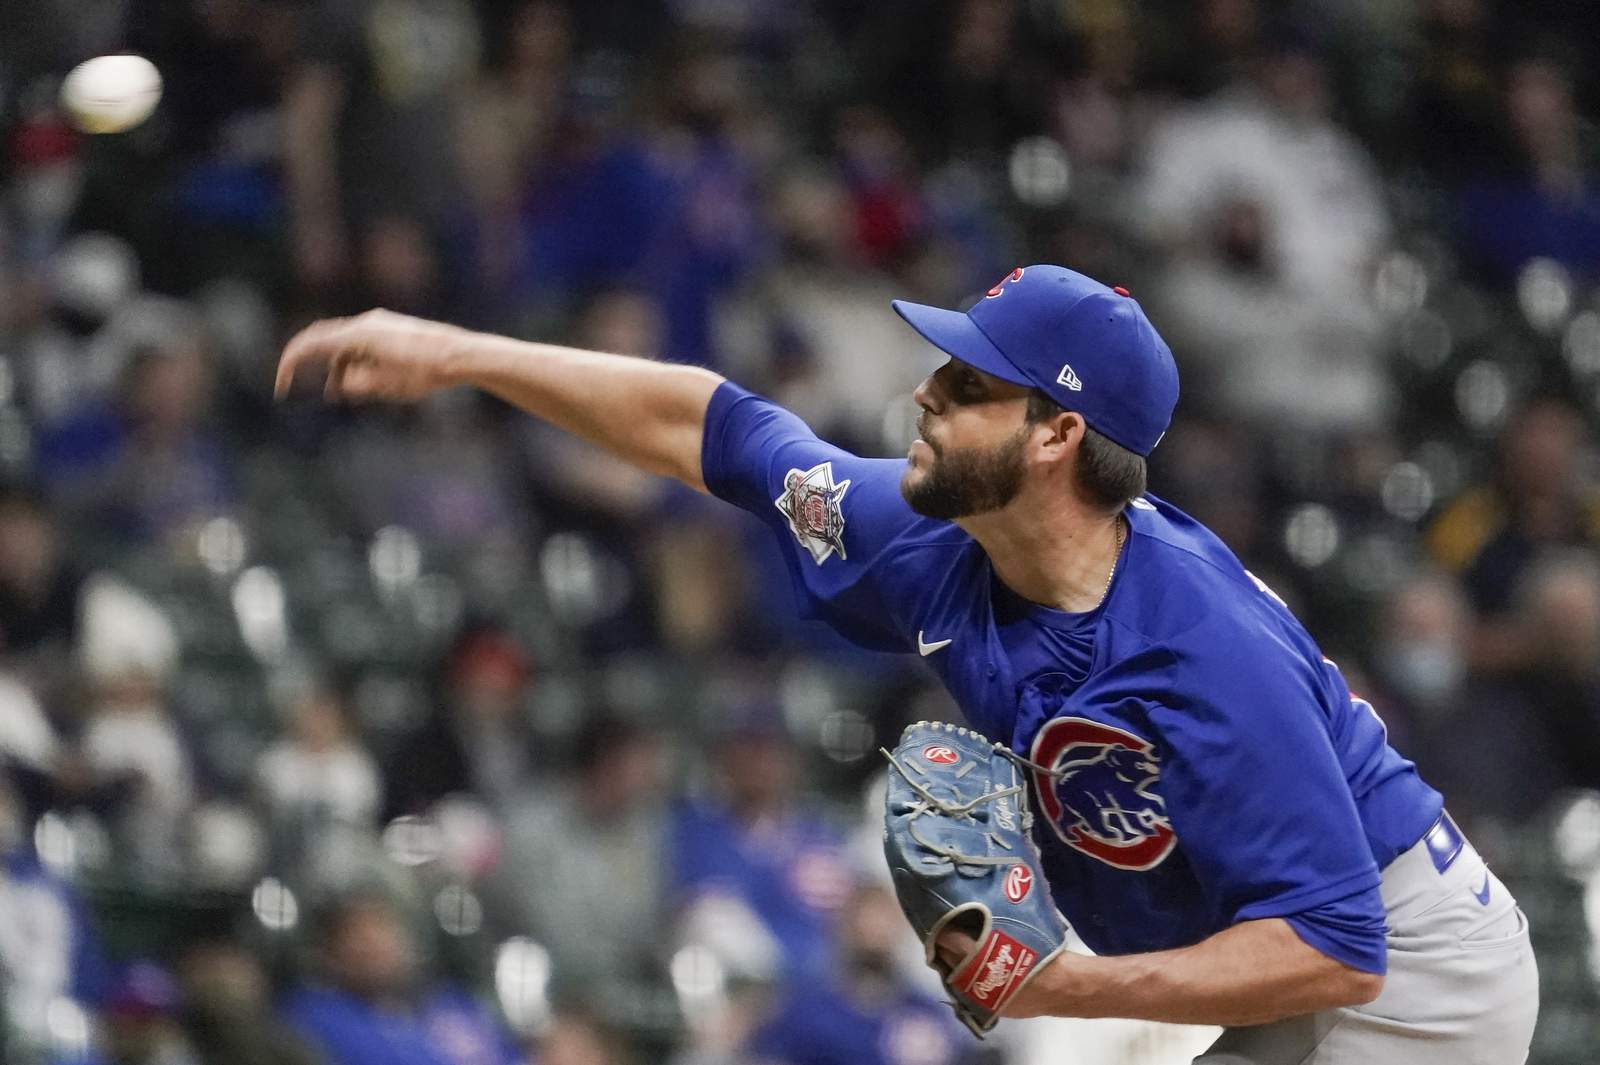 Cubs' Tepera suspended for 3 games, manager Ross 1 by MLB